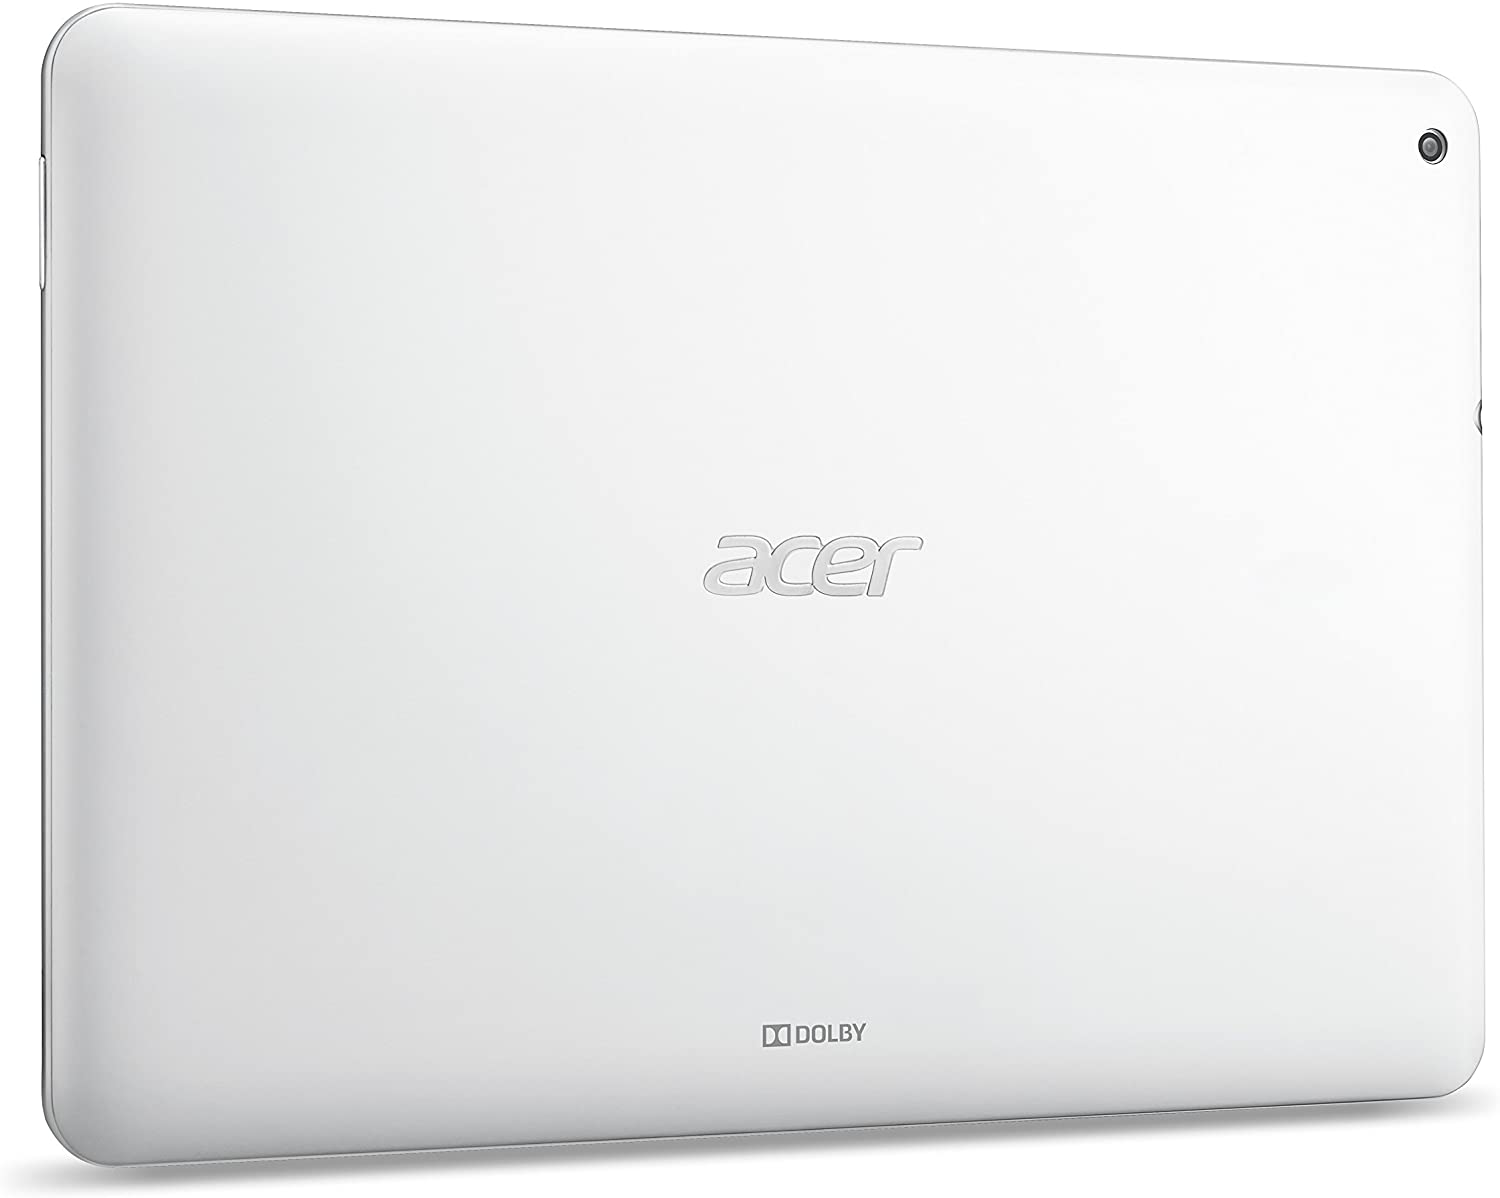 Acer Iconia A3-A10 10.1" Tablet